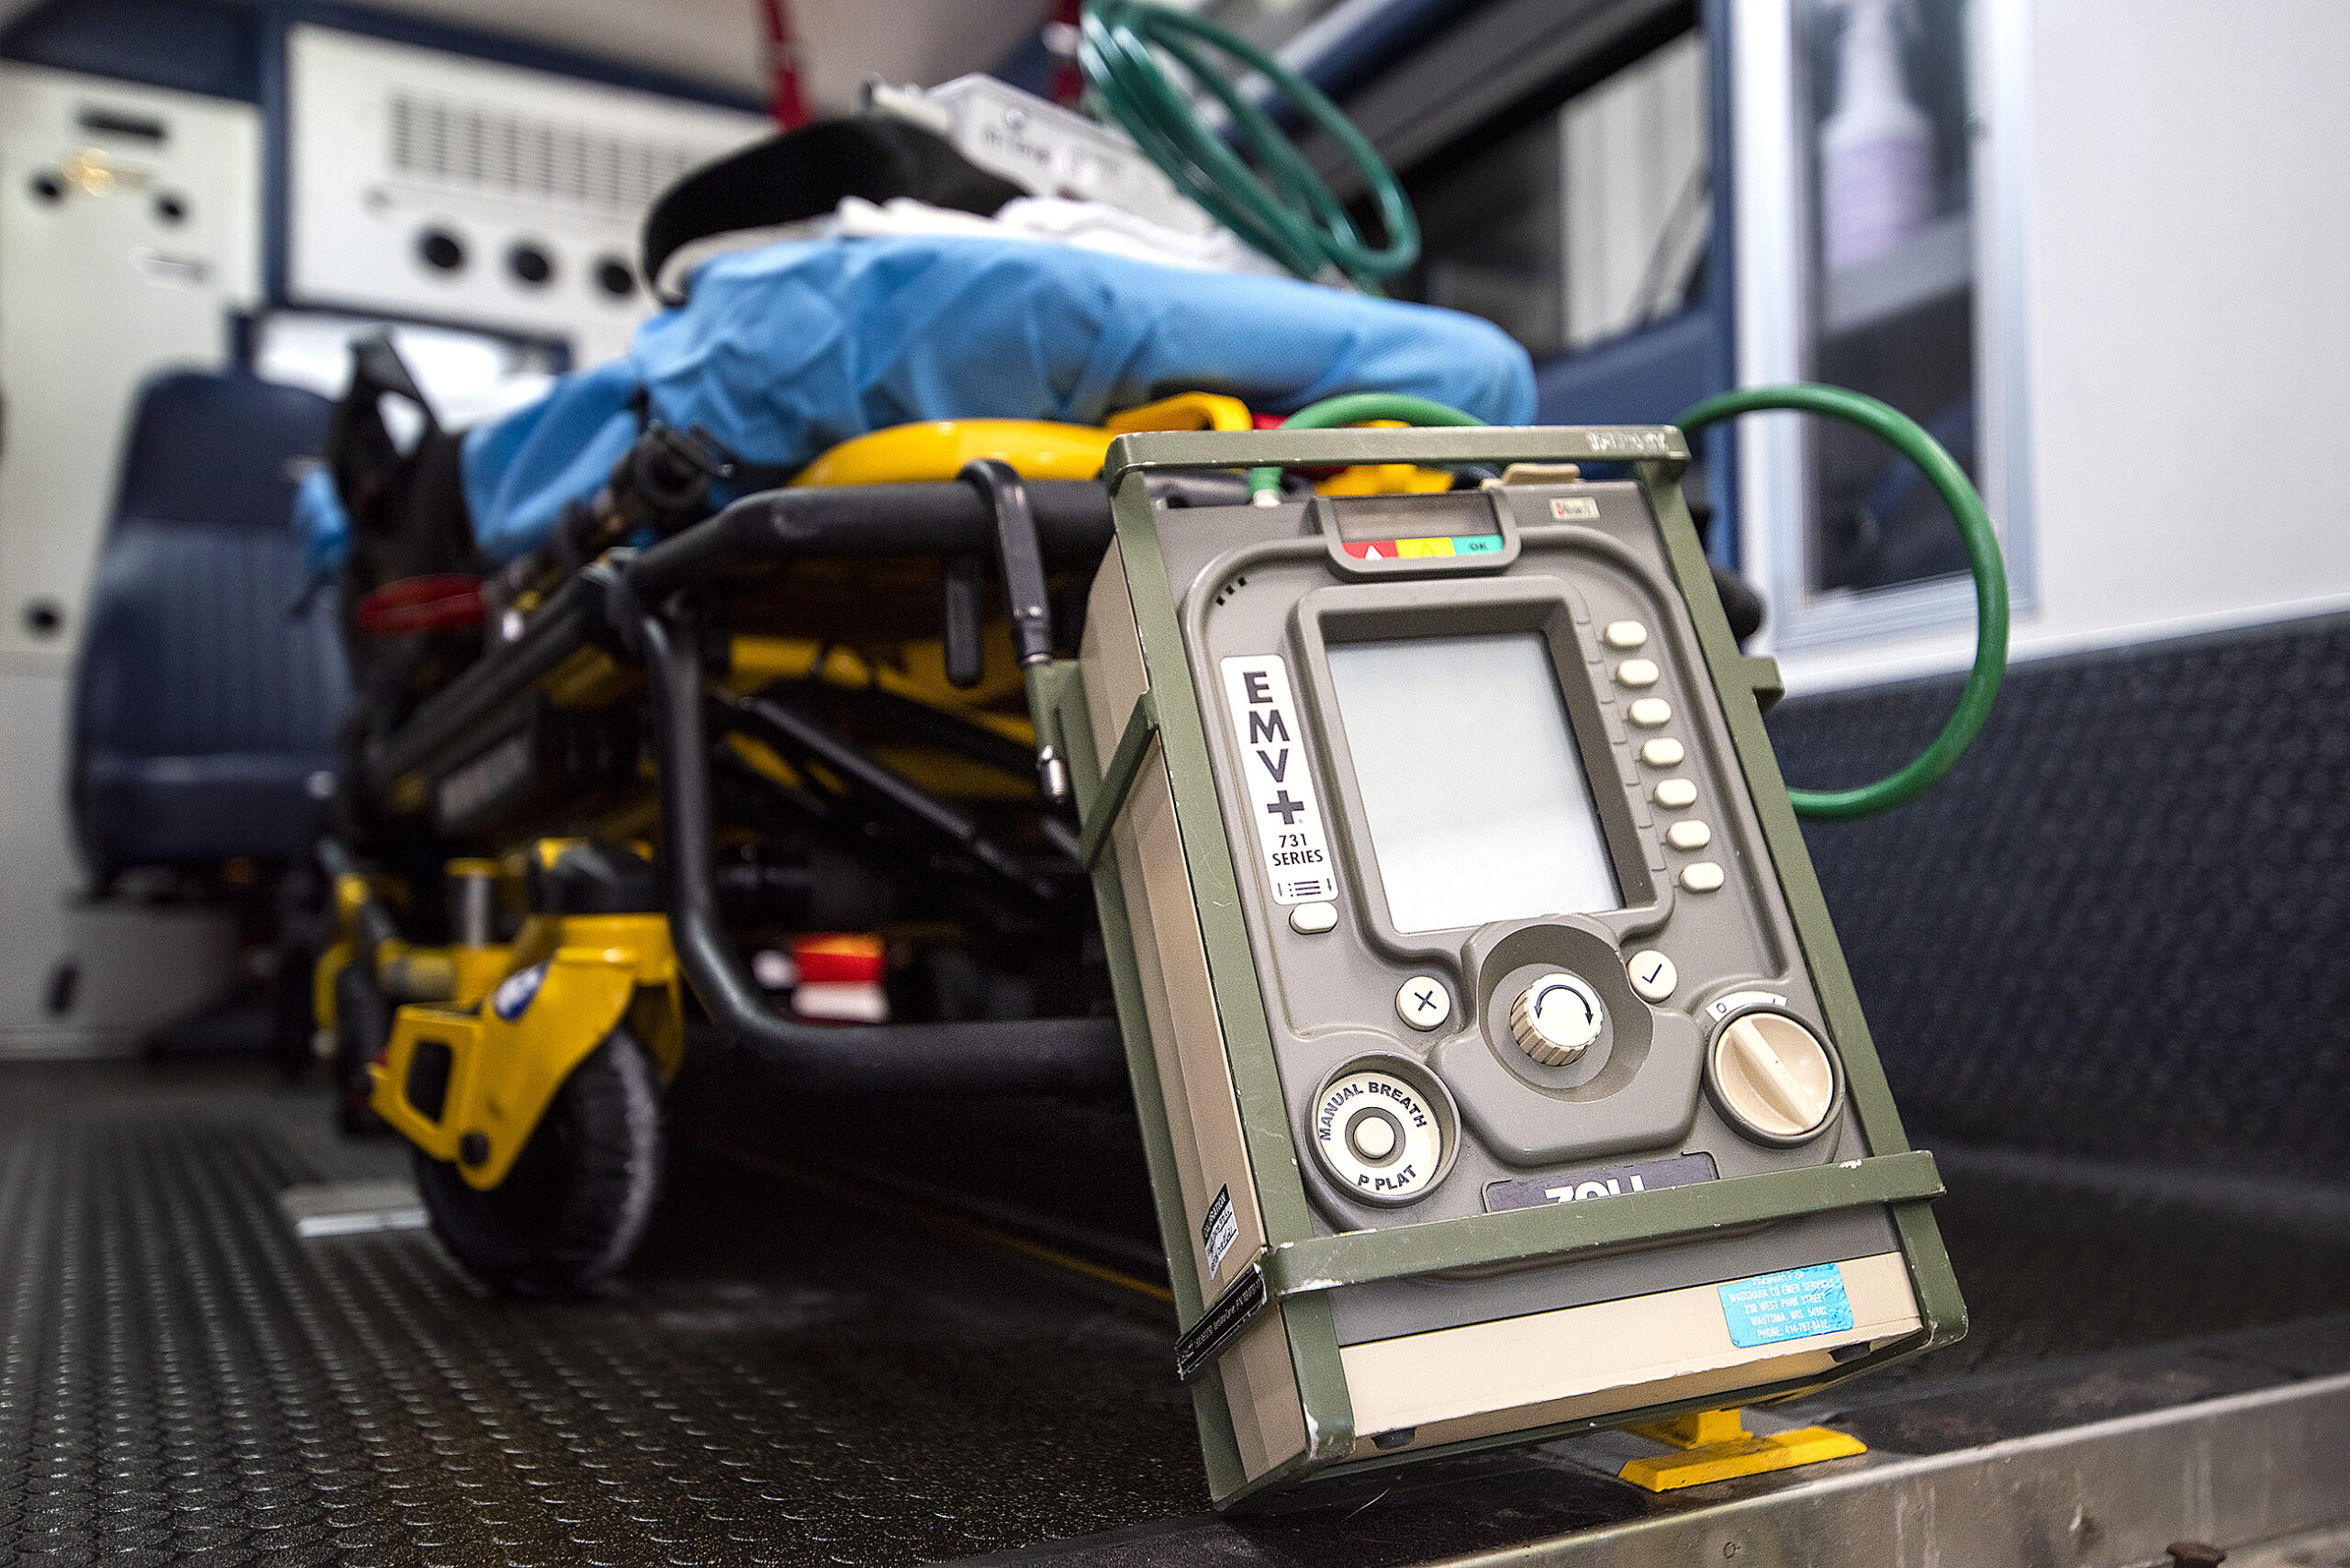 A ventilator with a screen and many buttons and knobs is placed in the back of an ambulance.